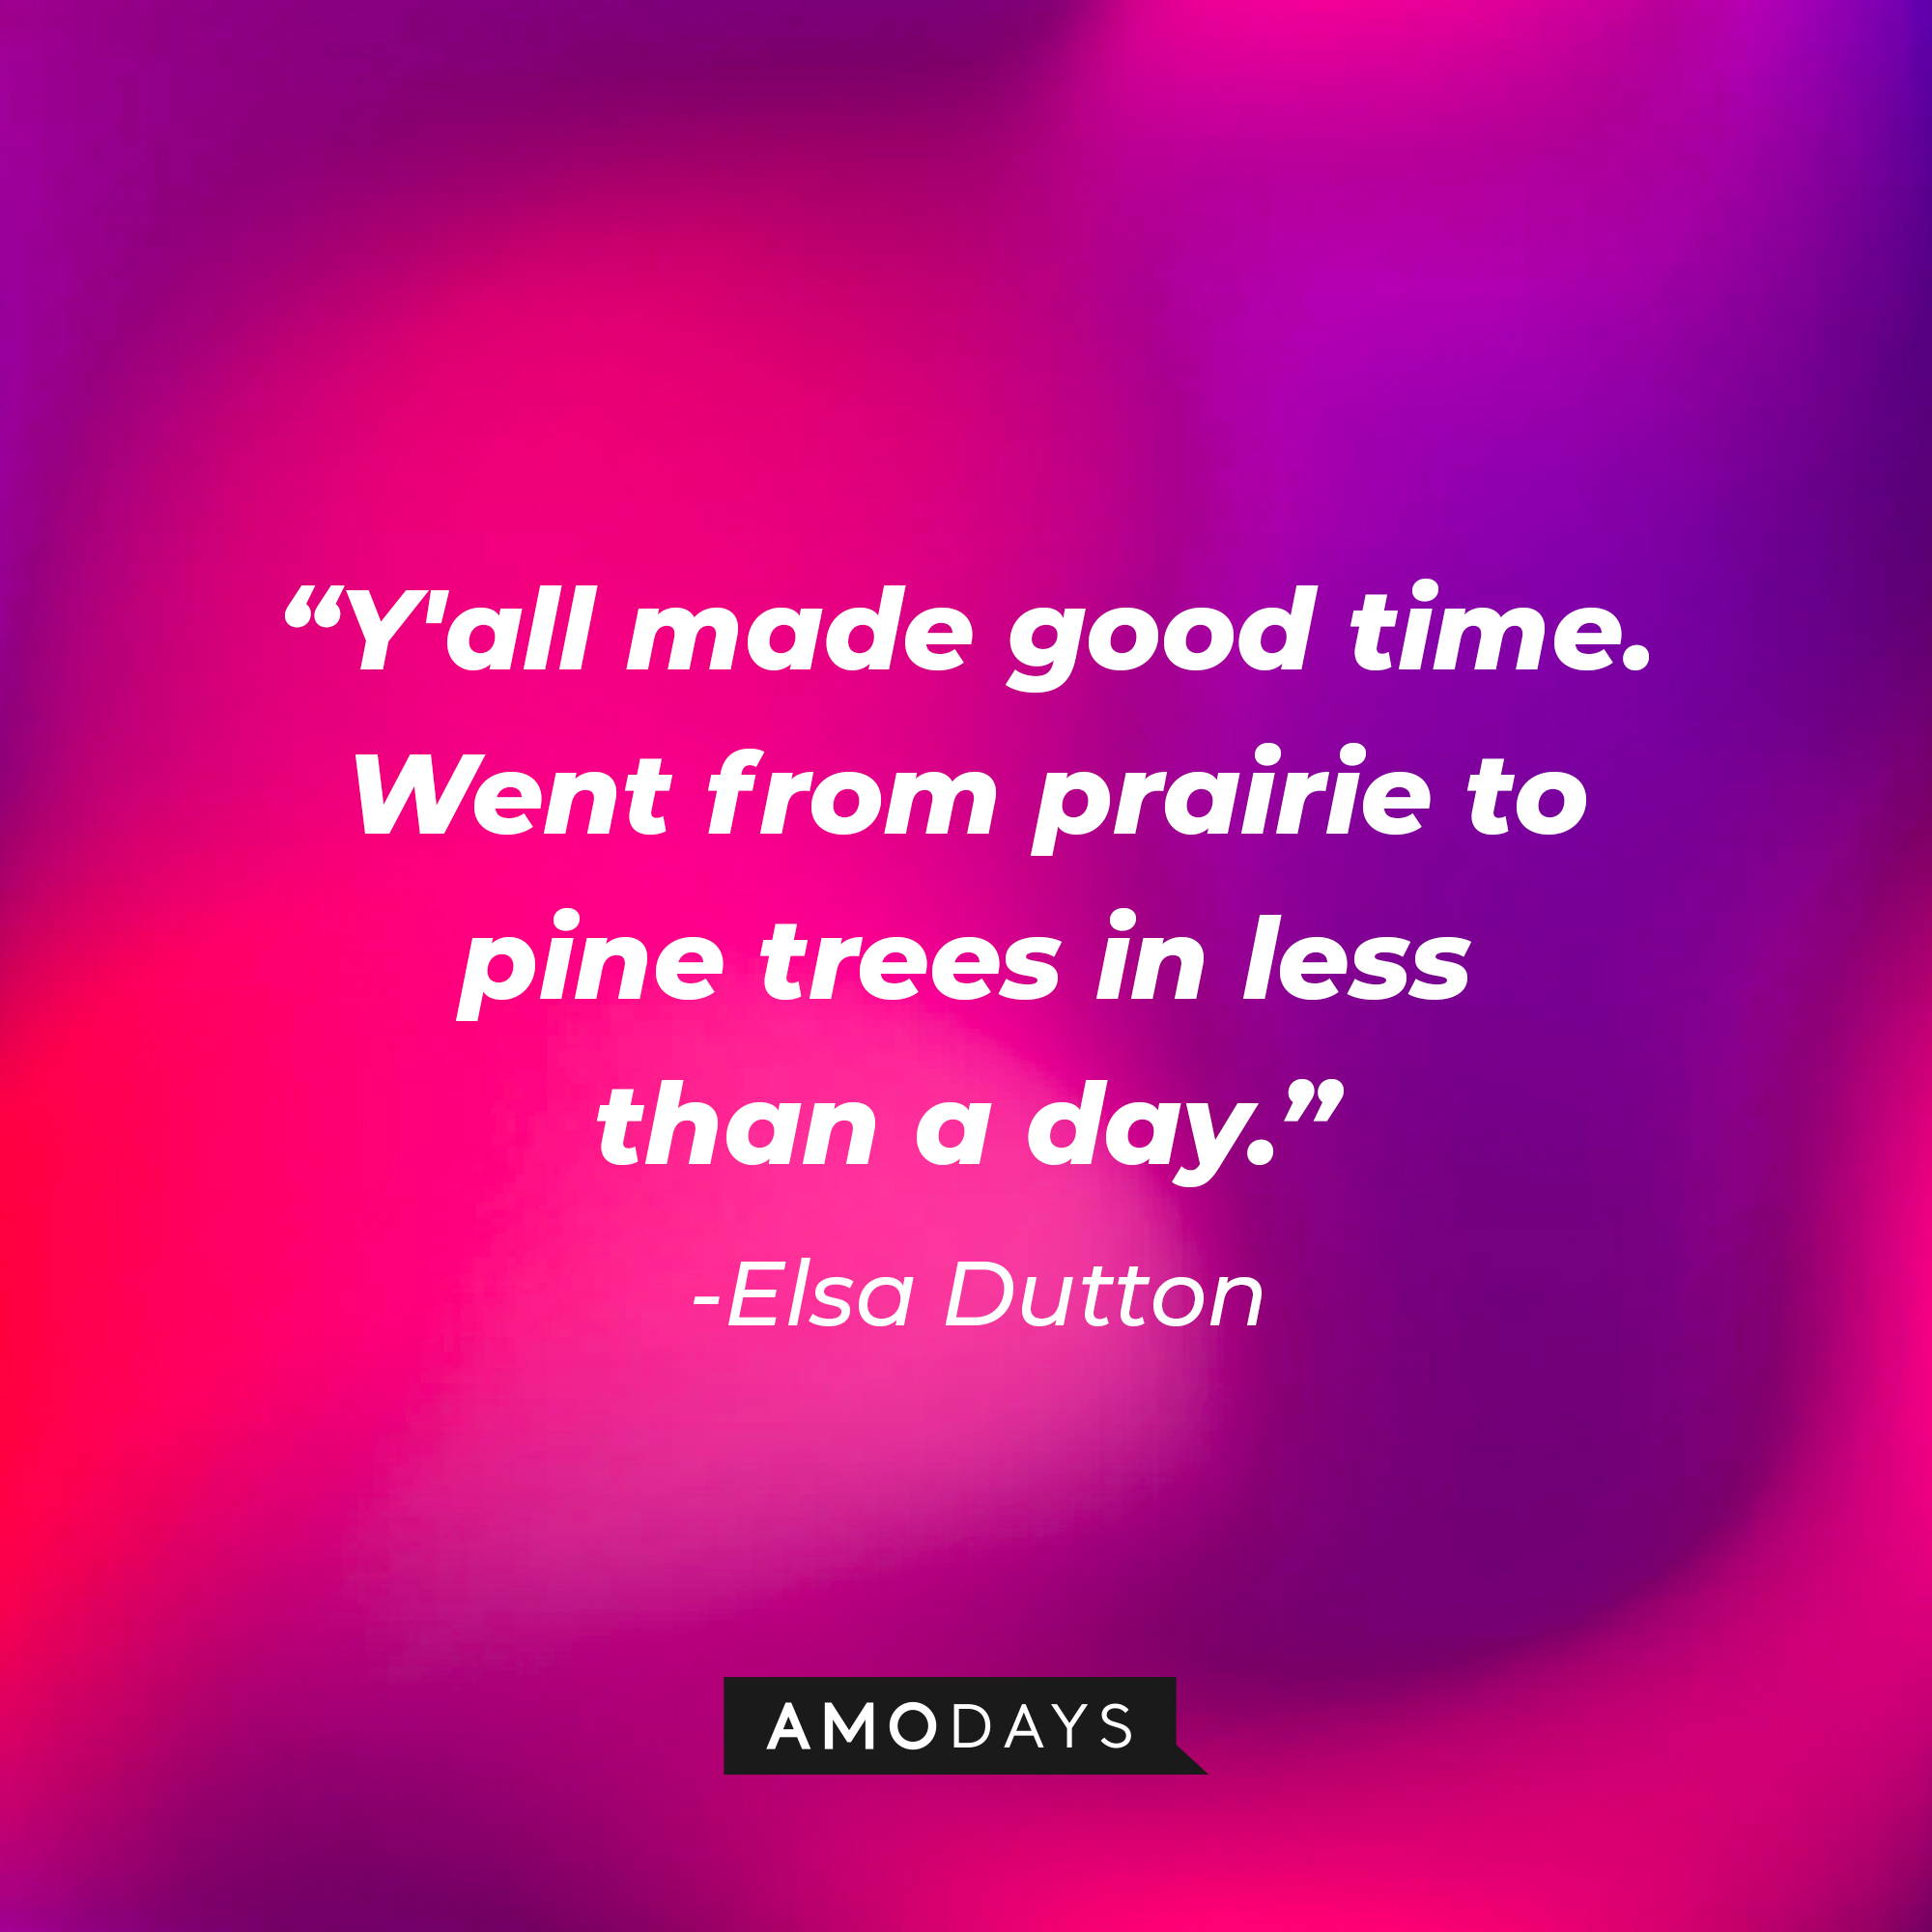 Elsa Dutton's quote: "Y'all made good time. Went from prairie to pine trees in less than a day." | Source: AmoDays